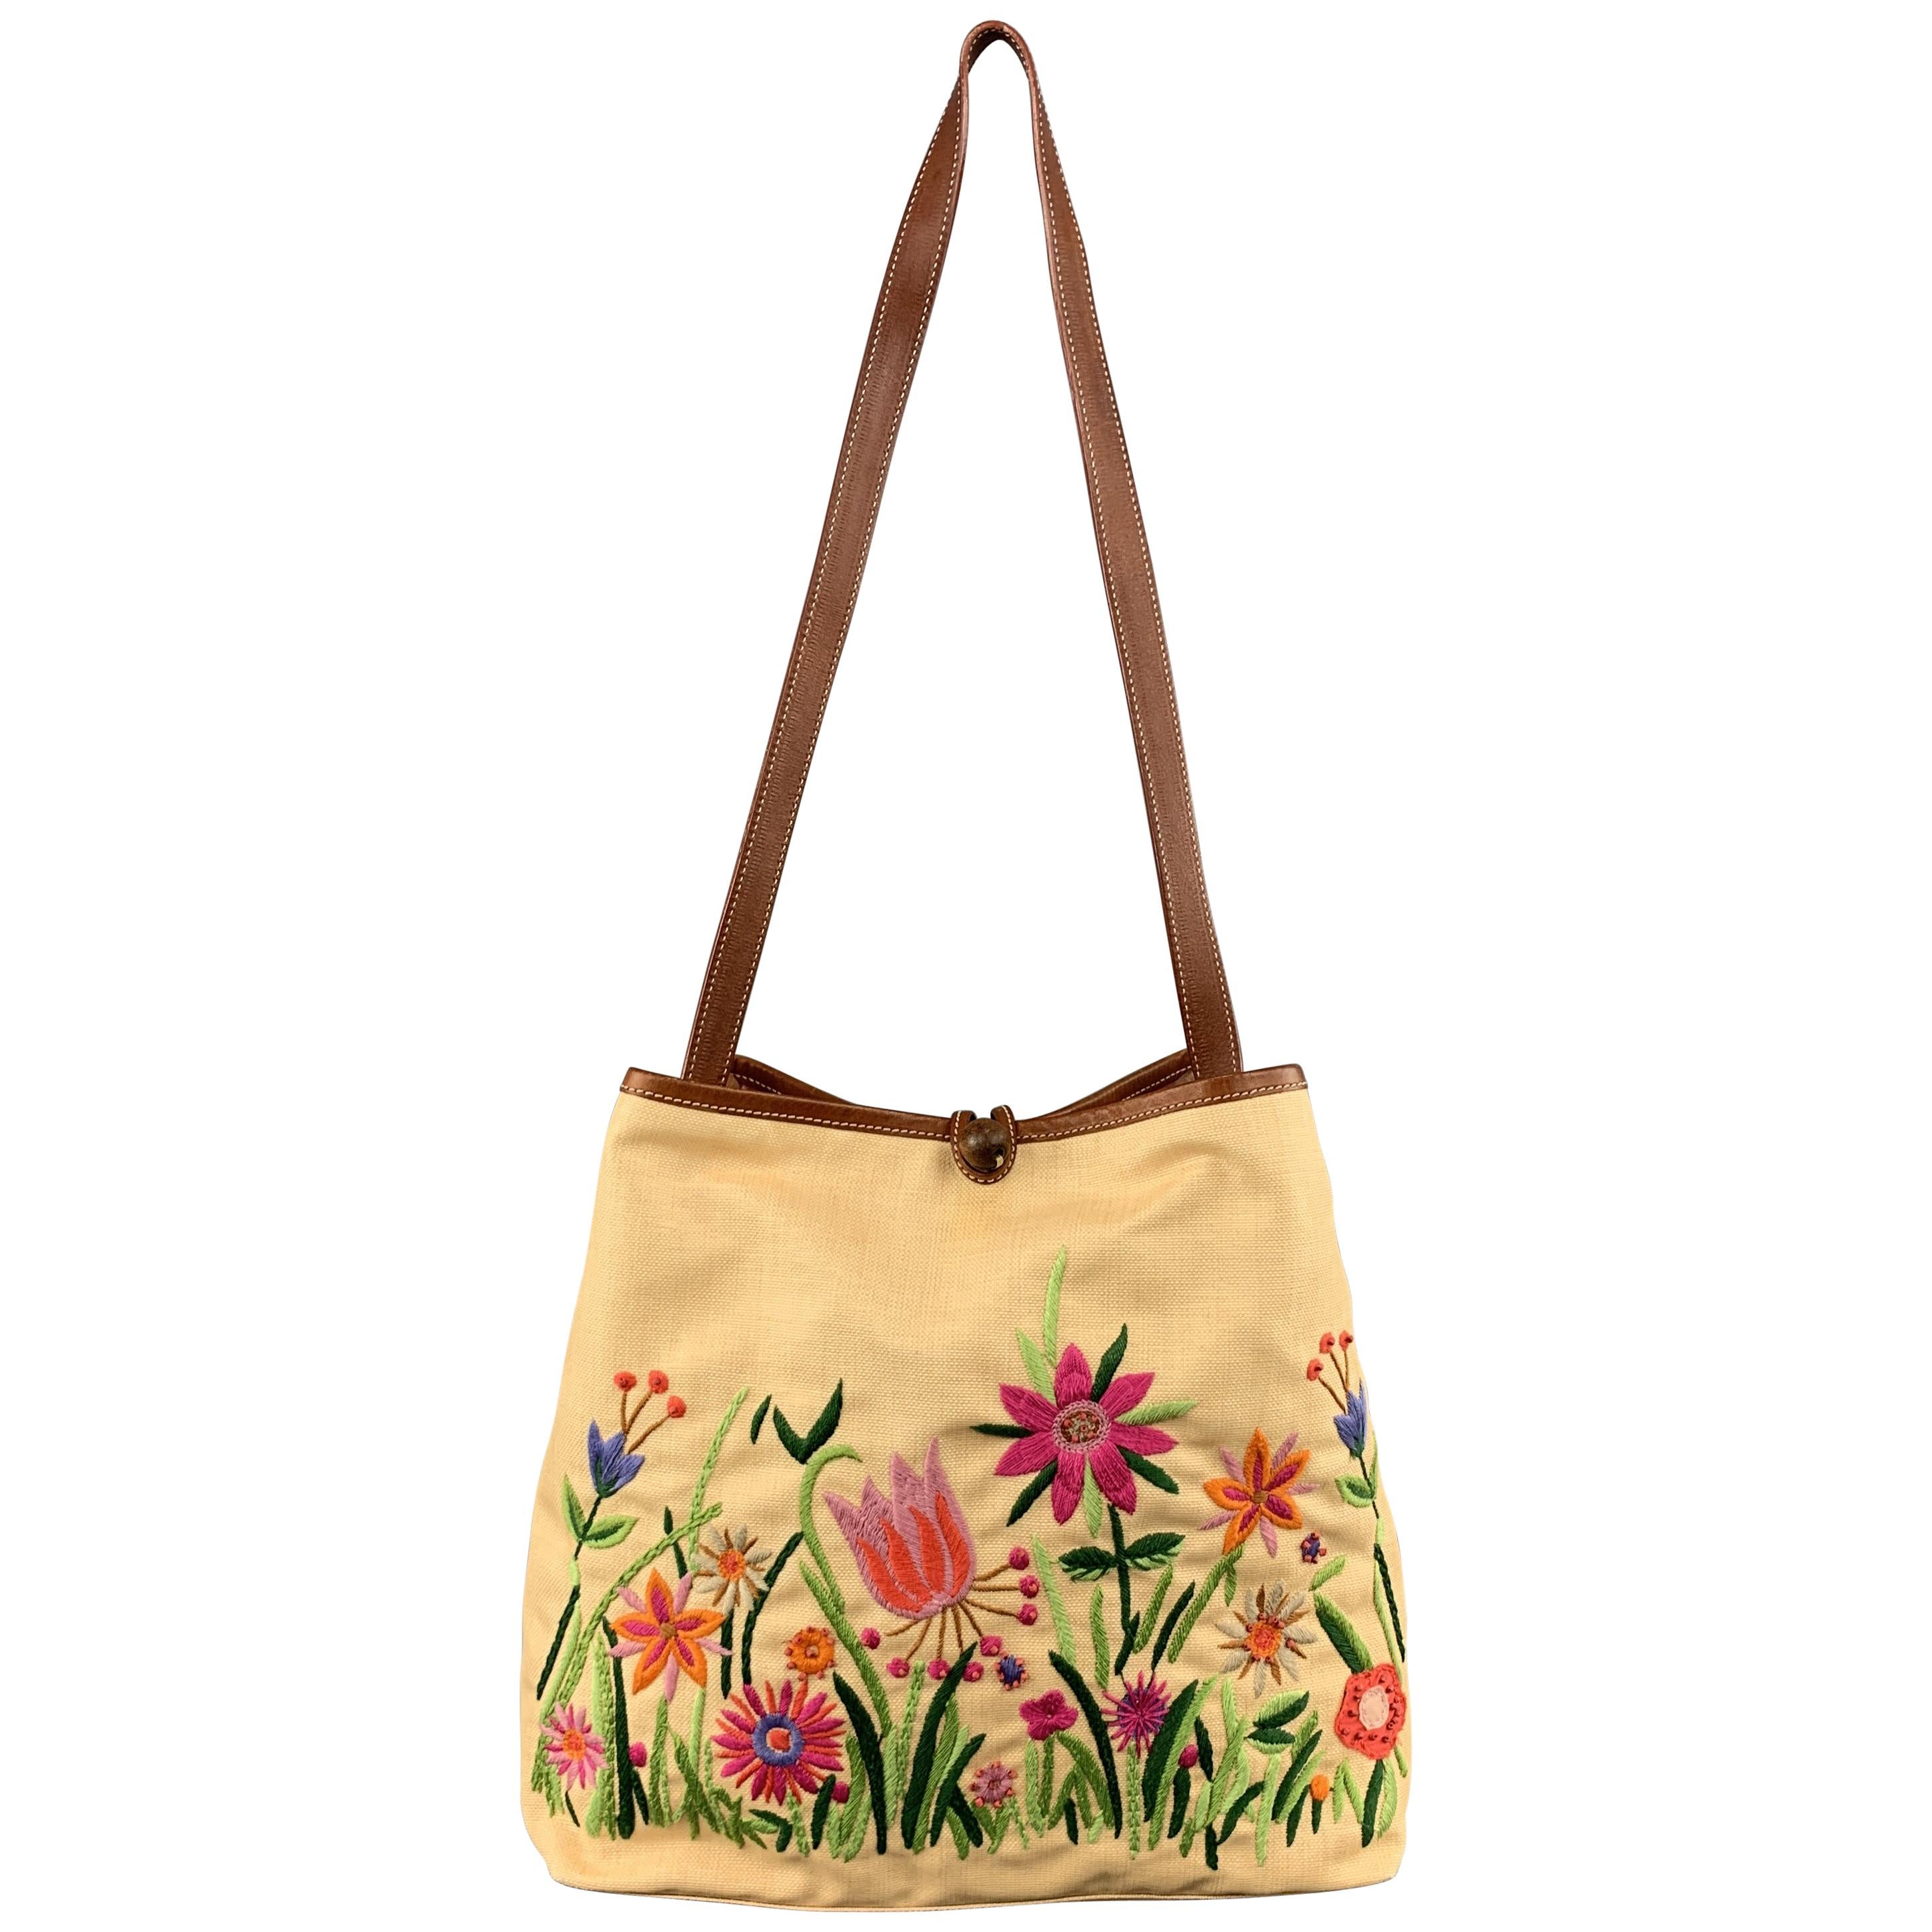 MOSCHINO Beige Floral Embroidered Canvas & Tan Leather Handbag